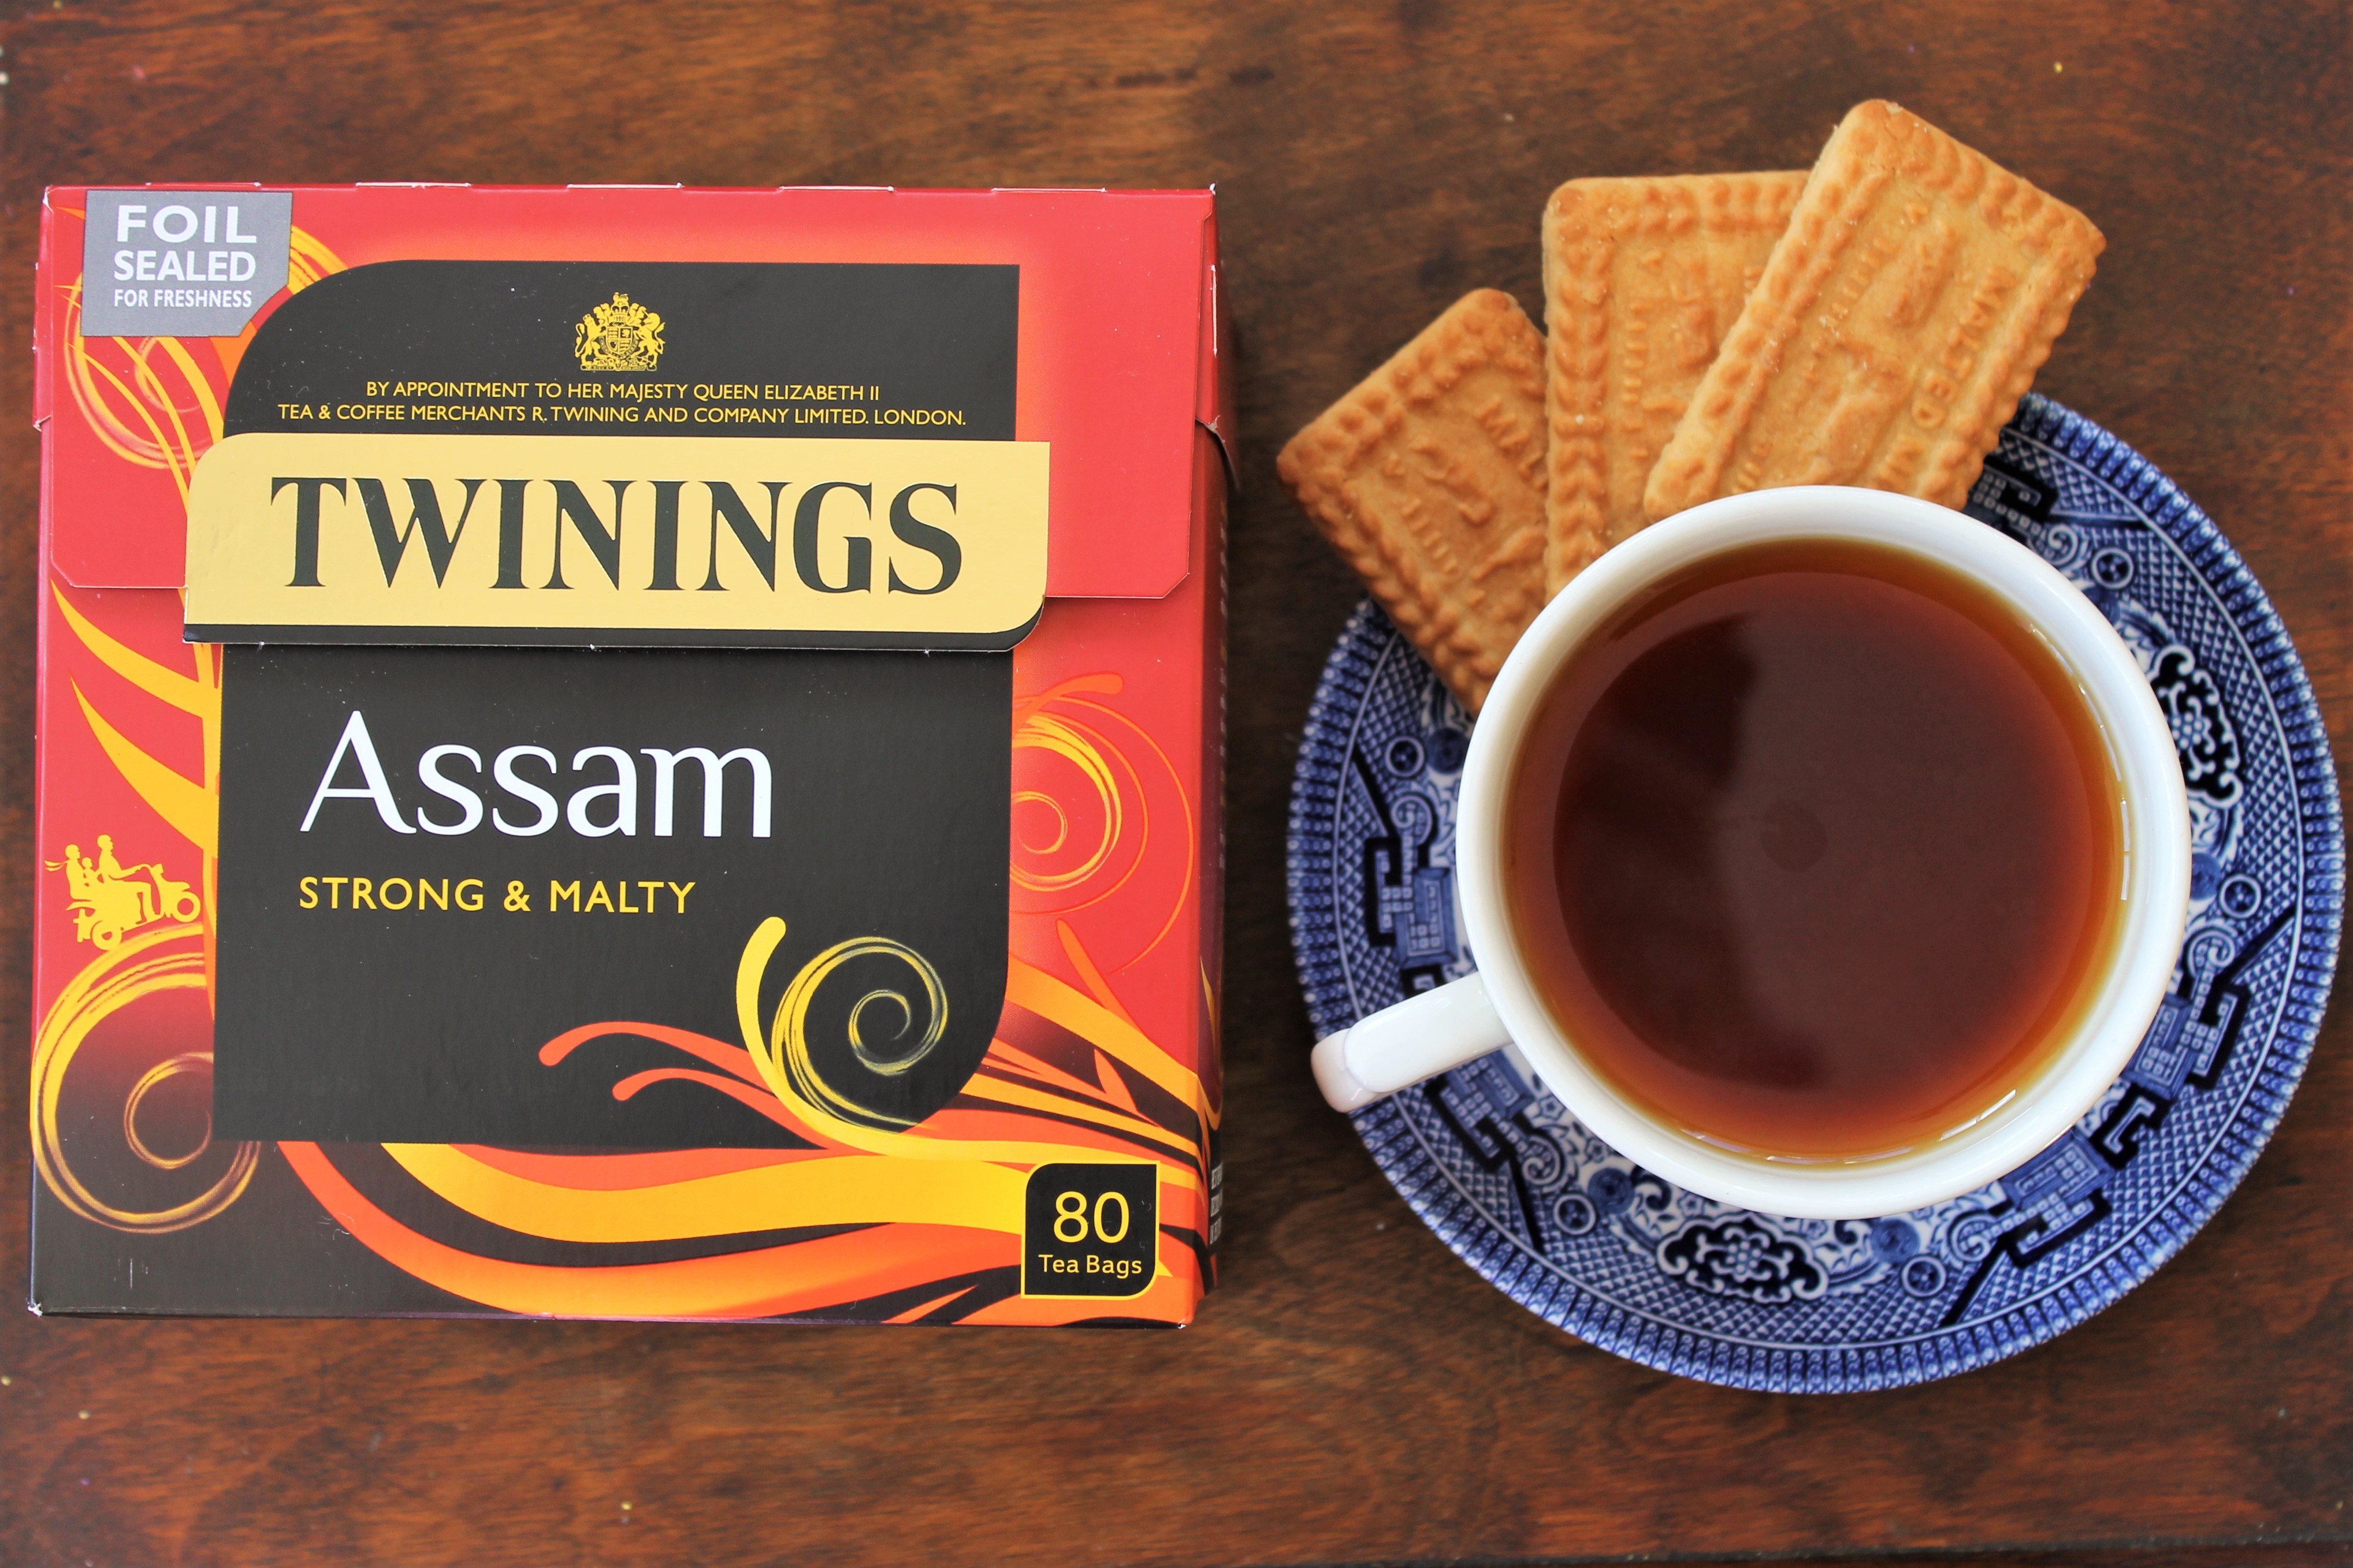 Twinings Assam tea review with malted milk biscuits